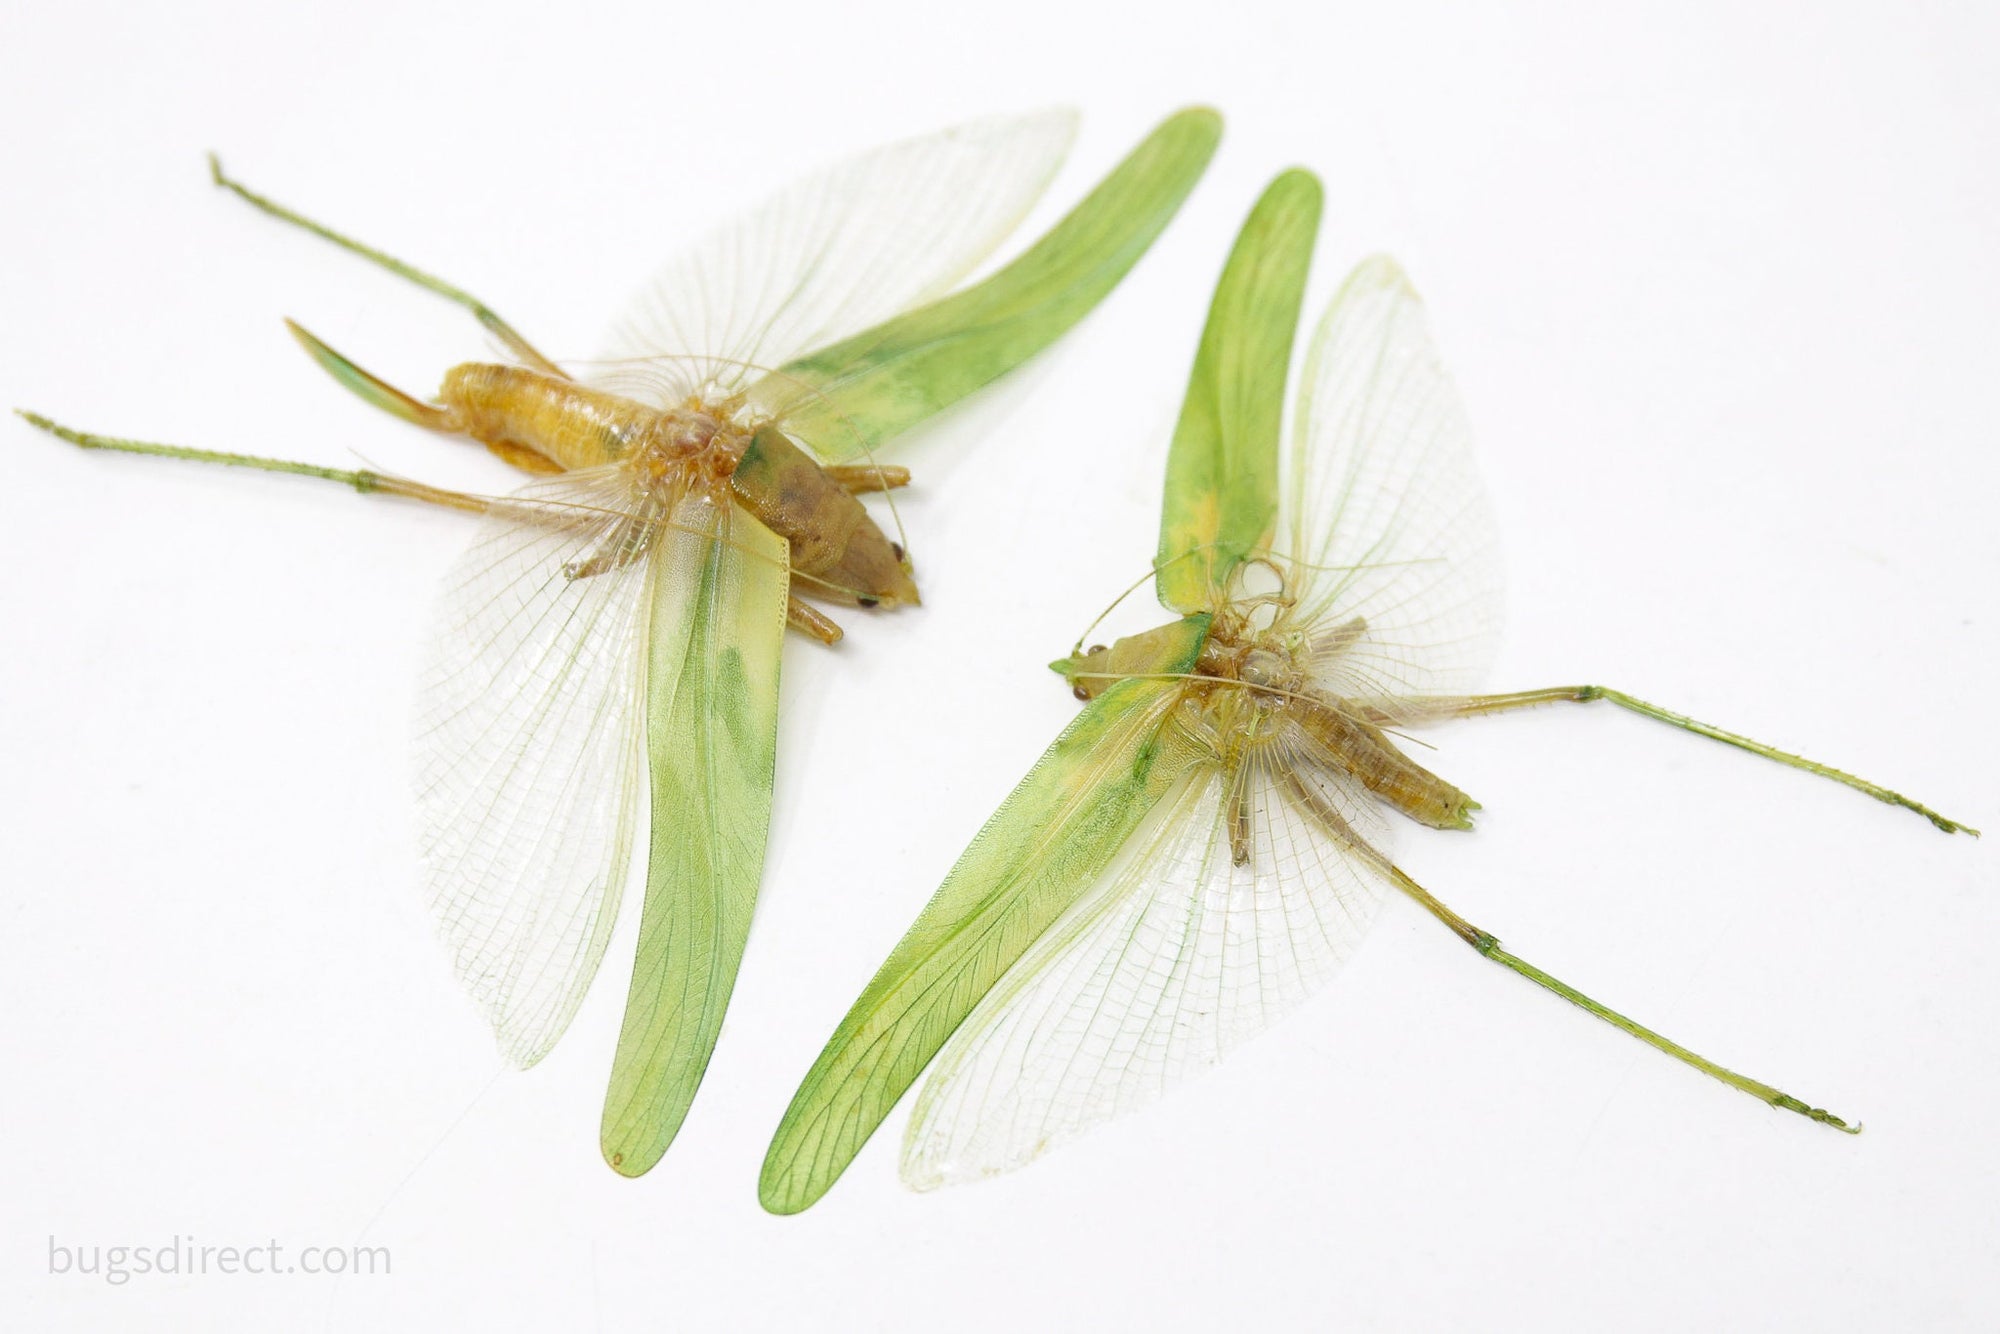 Pair of Green Leaf Katydids 4" Wingspan Spread Specimens A1 Quality Real Insect Entomology